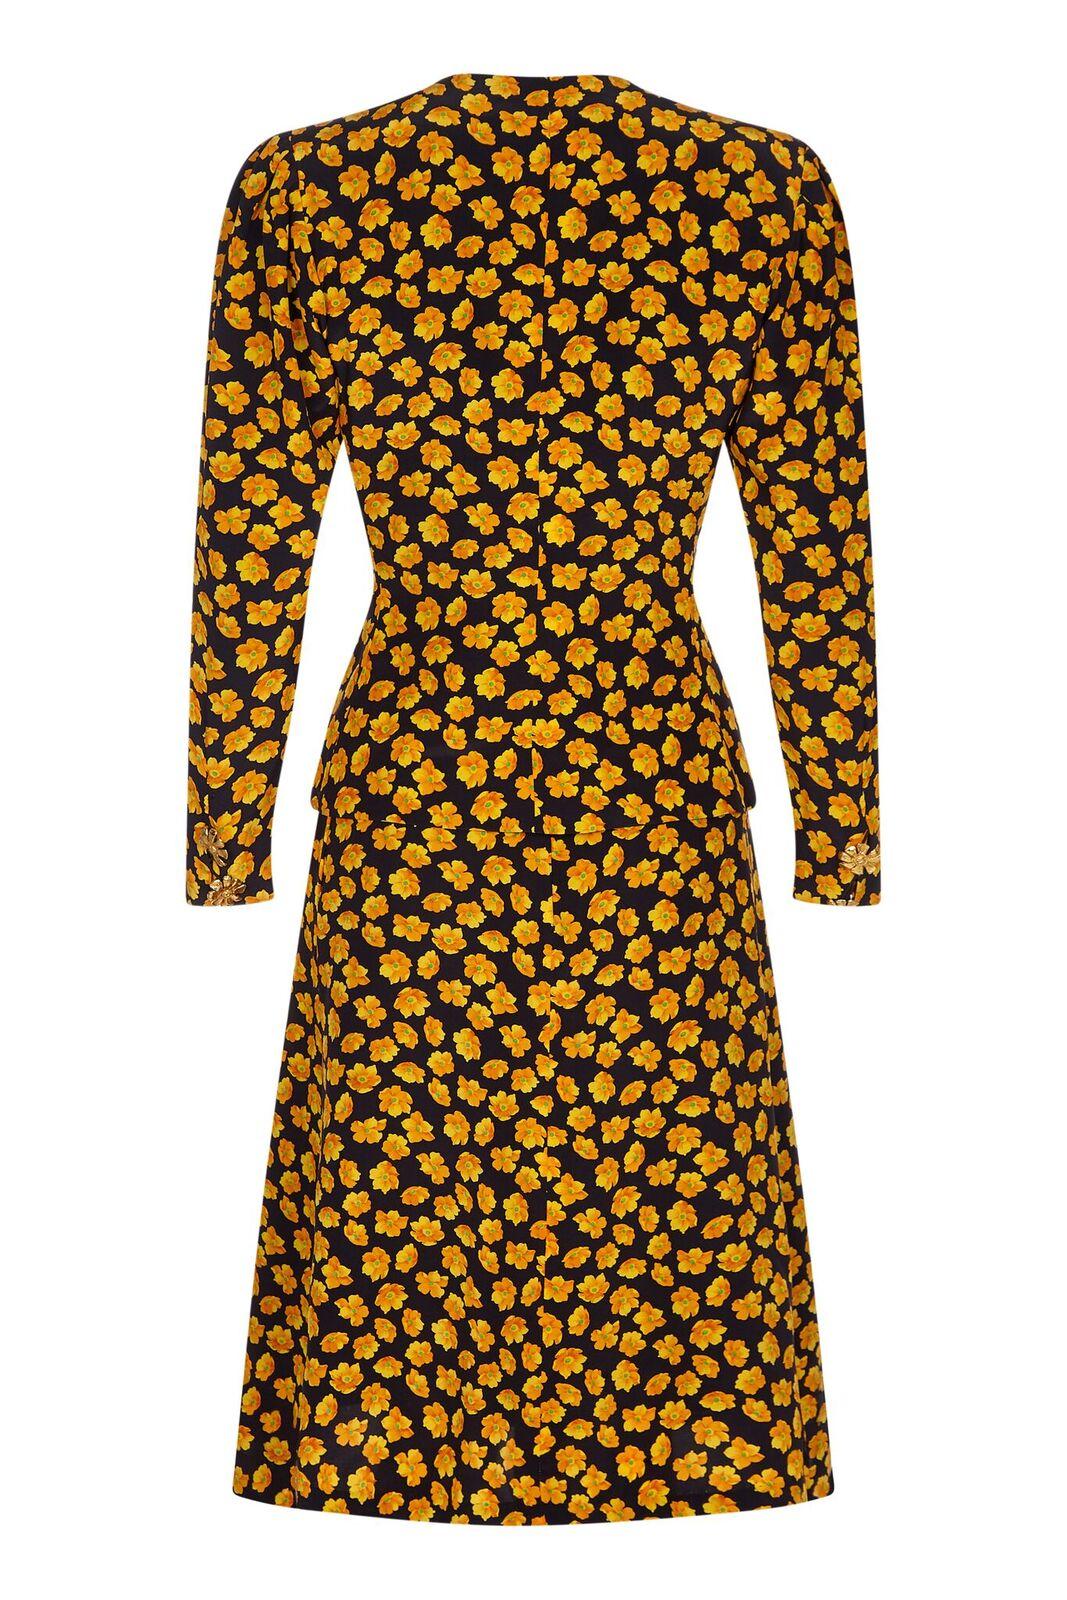 This charming Yves Saint Laurent 1980s or early 1990s 2 piece silk set is in pristine condition and wonderfully adaptable as separates. The vibrant golden yellow floral design is playful and gamine, yet could still communicate well in a formal